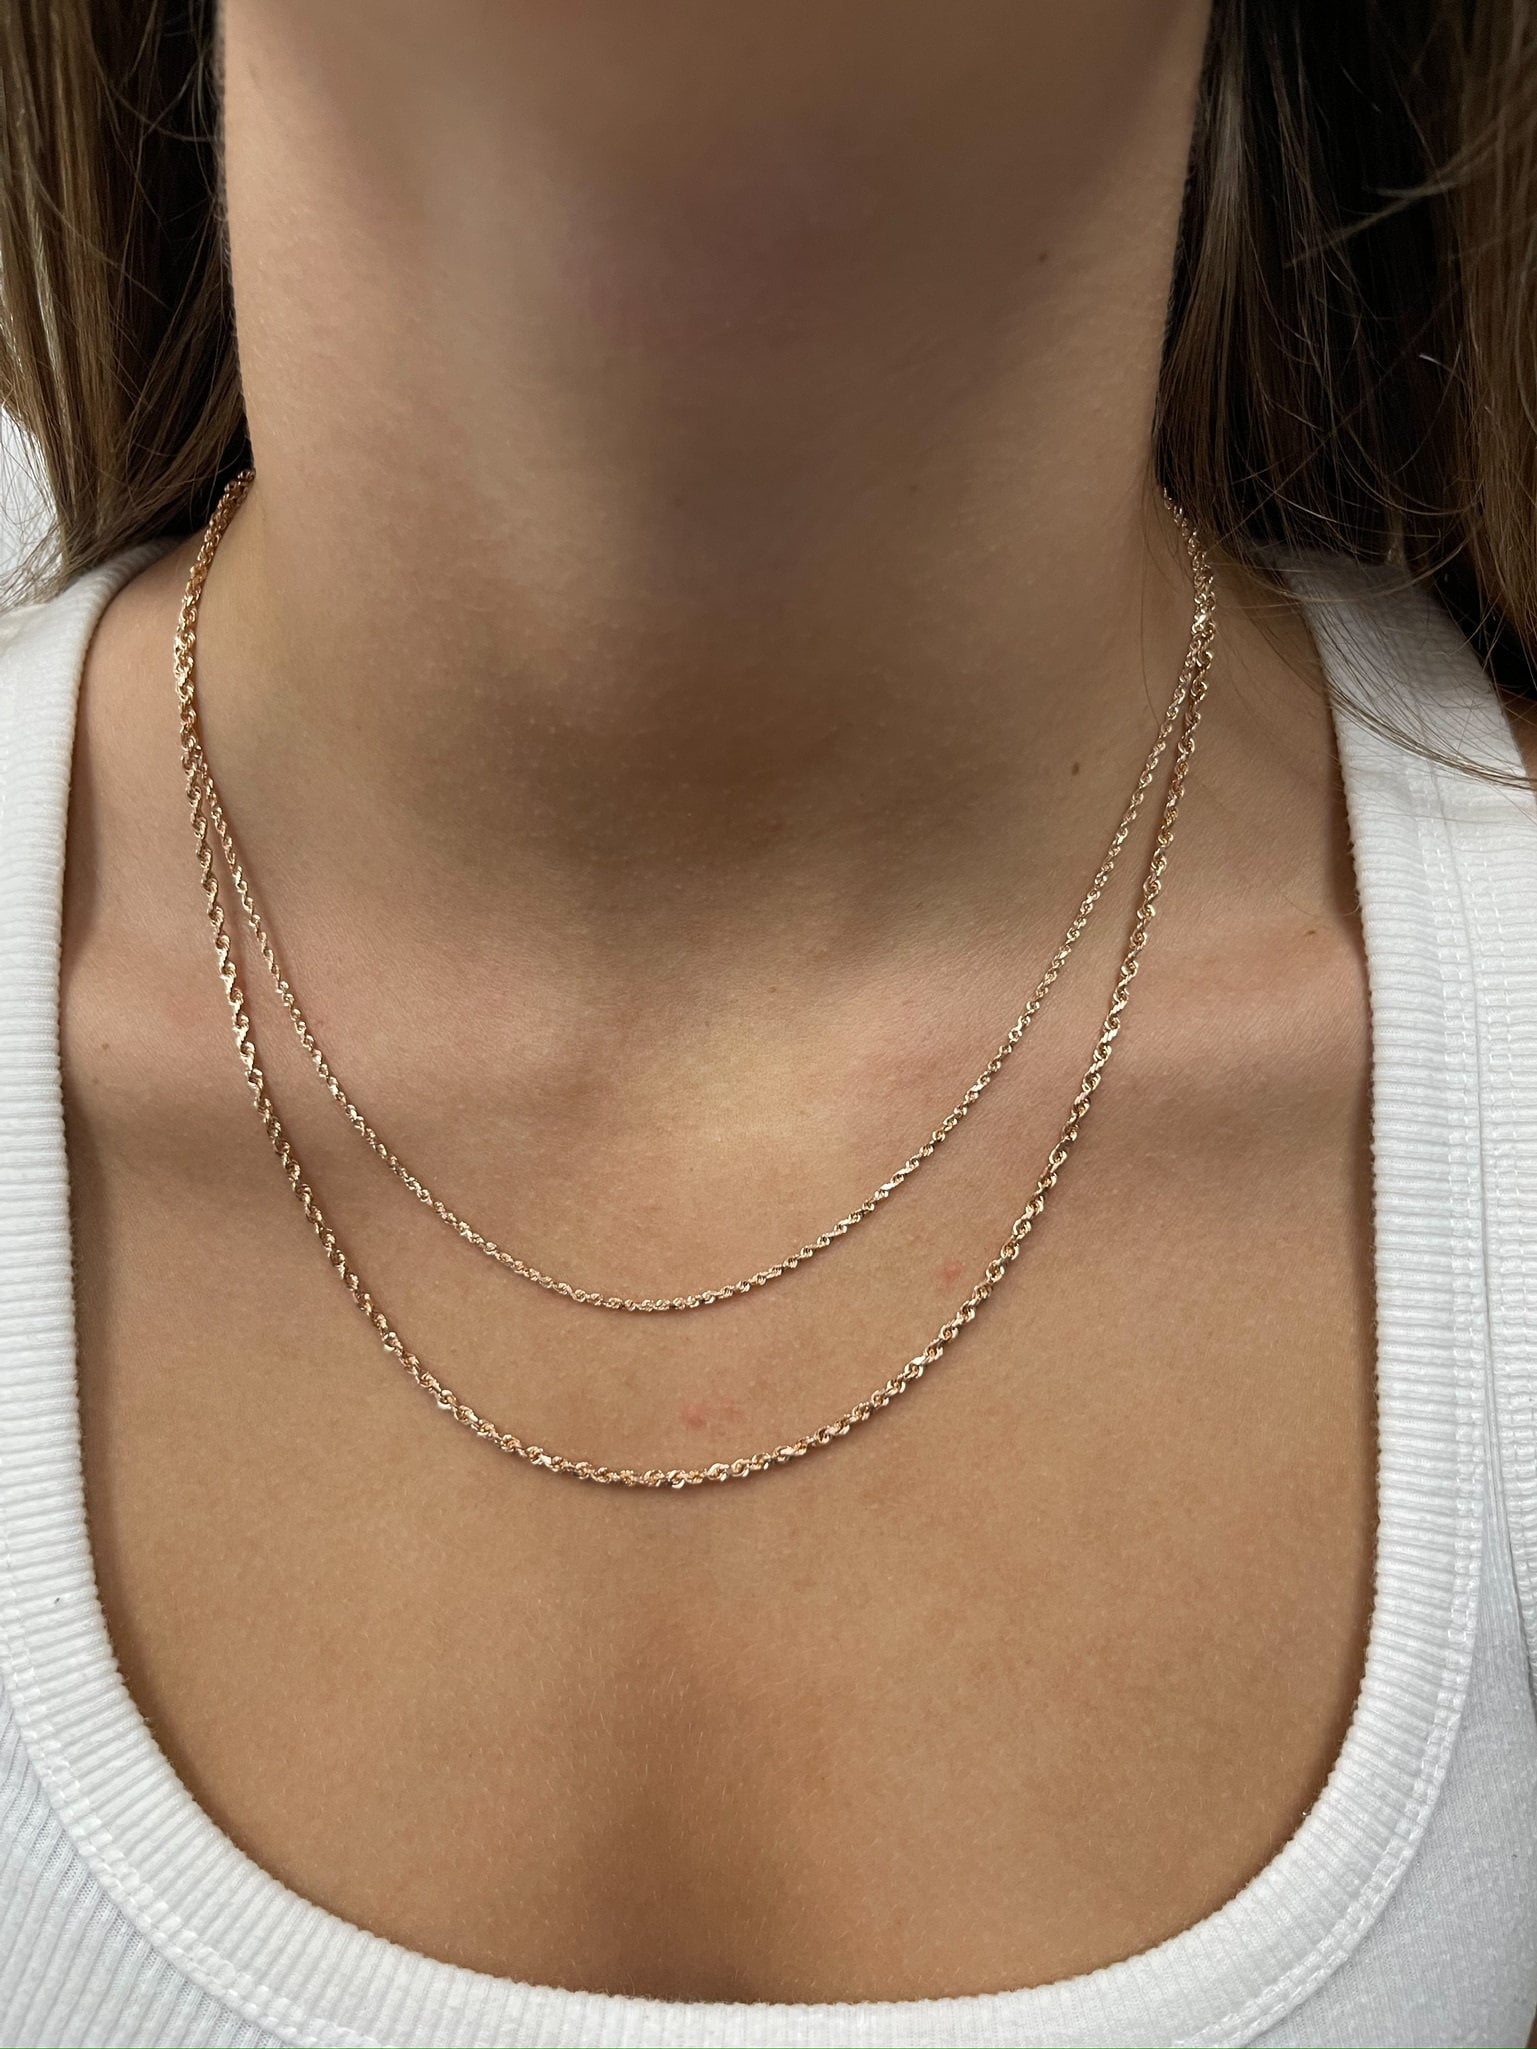 9ct Rose Gold 3.2mm Diamond Cut Rope Chain Necklace 18-24